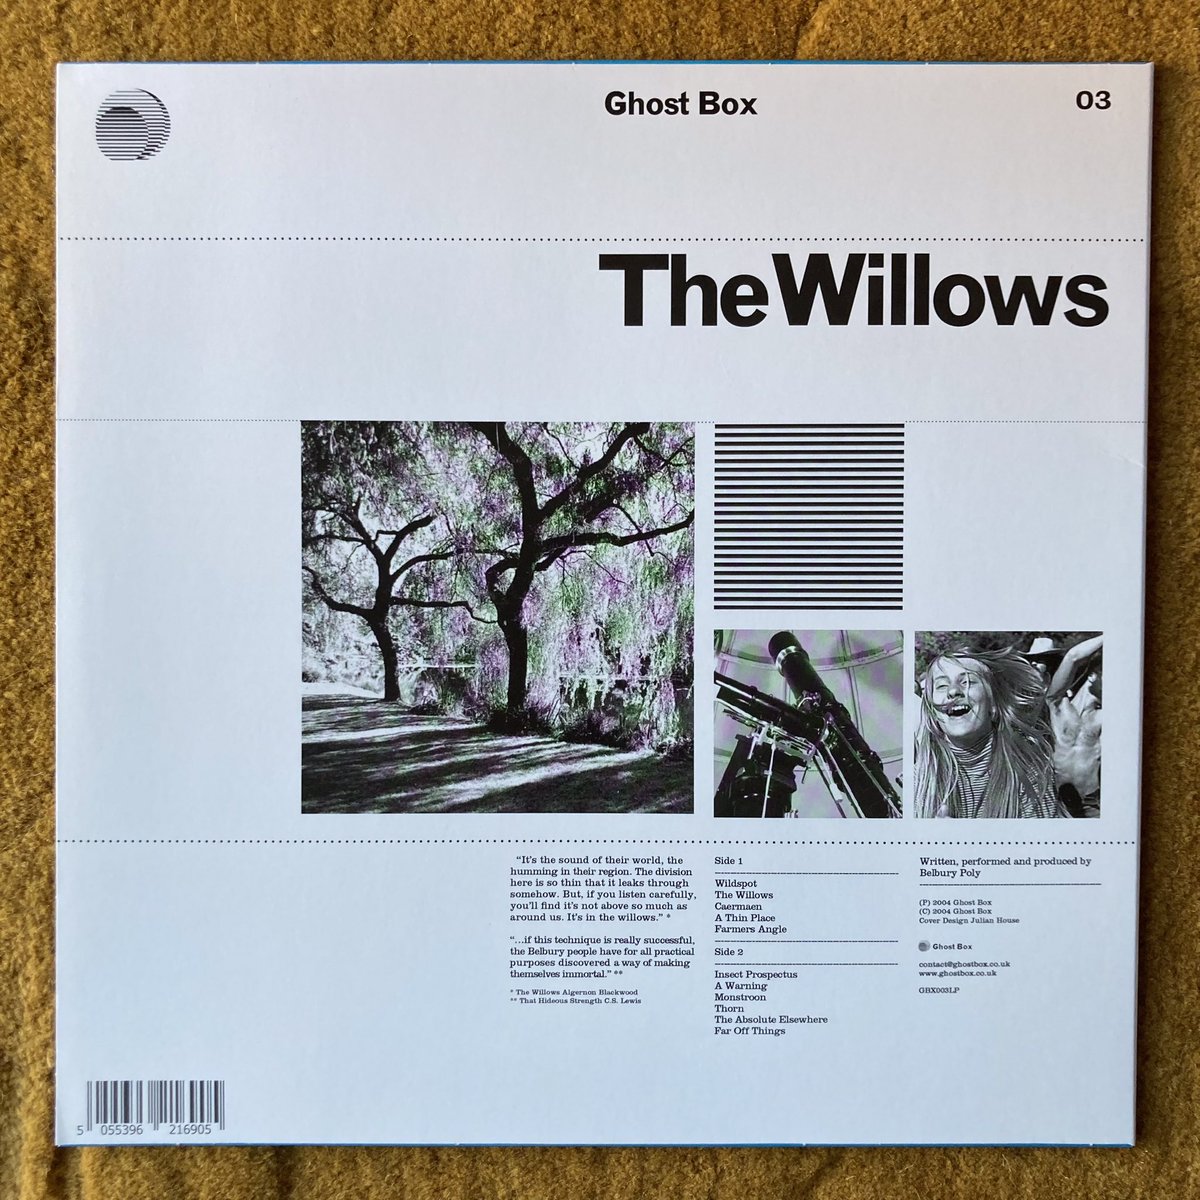 Belbury Poly (LP) - The Willows (@GhostBoxRecords) monorailmusic.com/product/the-wi… 🎛️🌳🎛️ #ghostly #altered #voices #archival #fragments #conjure #children #television #programs #haunted #landscapes #radiophonic #oddly #familiar #shelved #children #TV #programs #spooky  (@Monorail_Music)